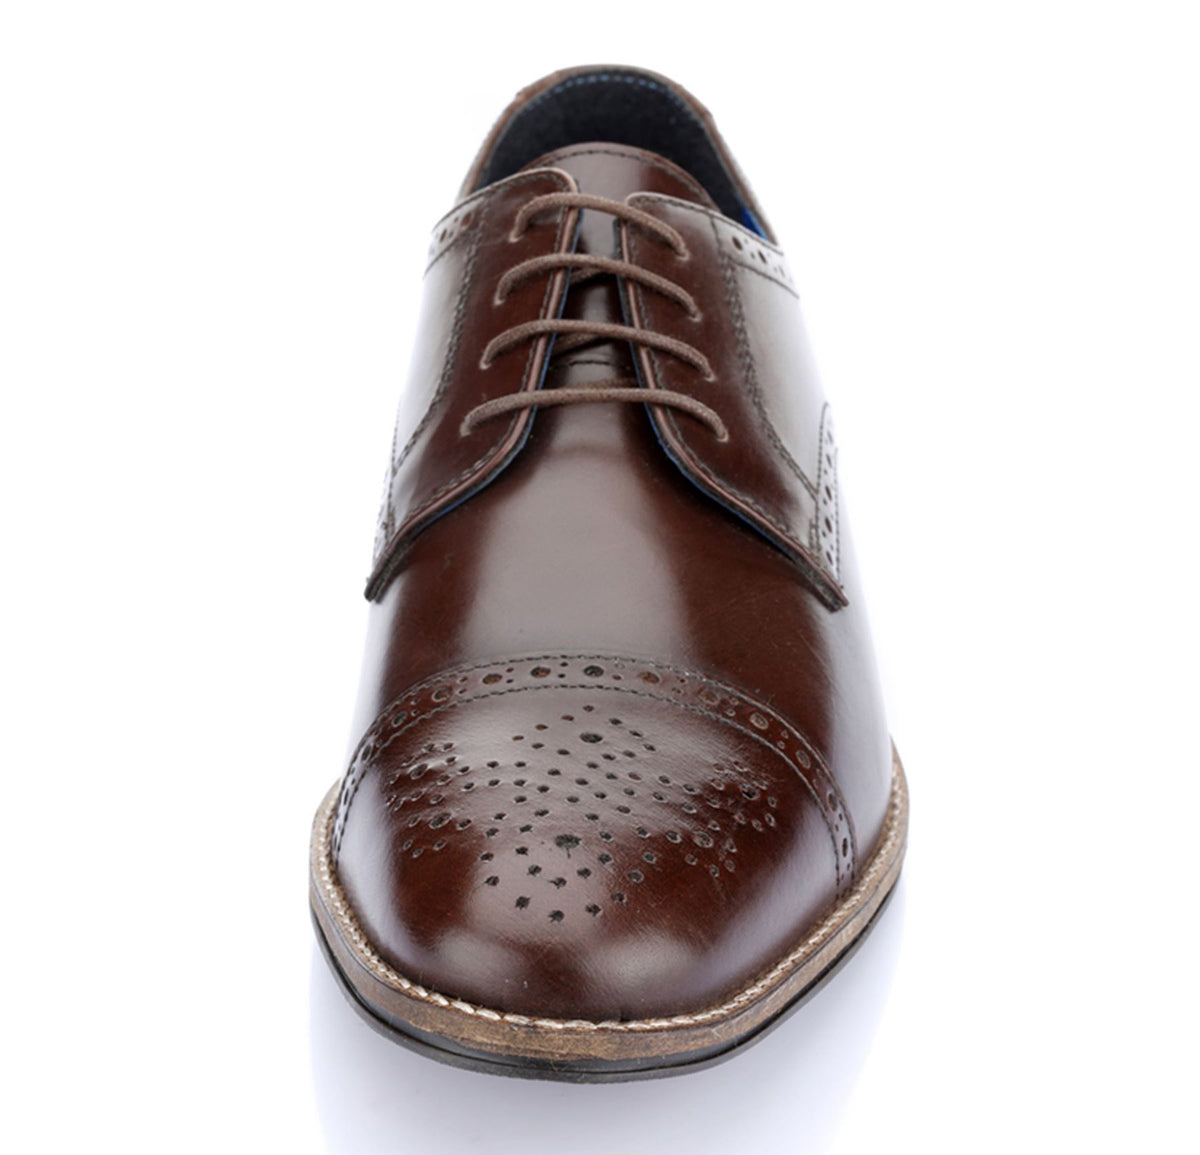 Red Tape Crick Claydon Men's Leather Lace Up Brogues